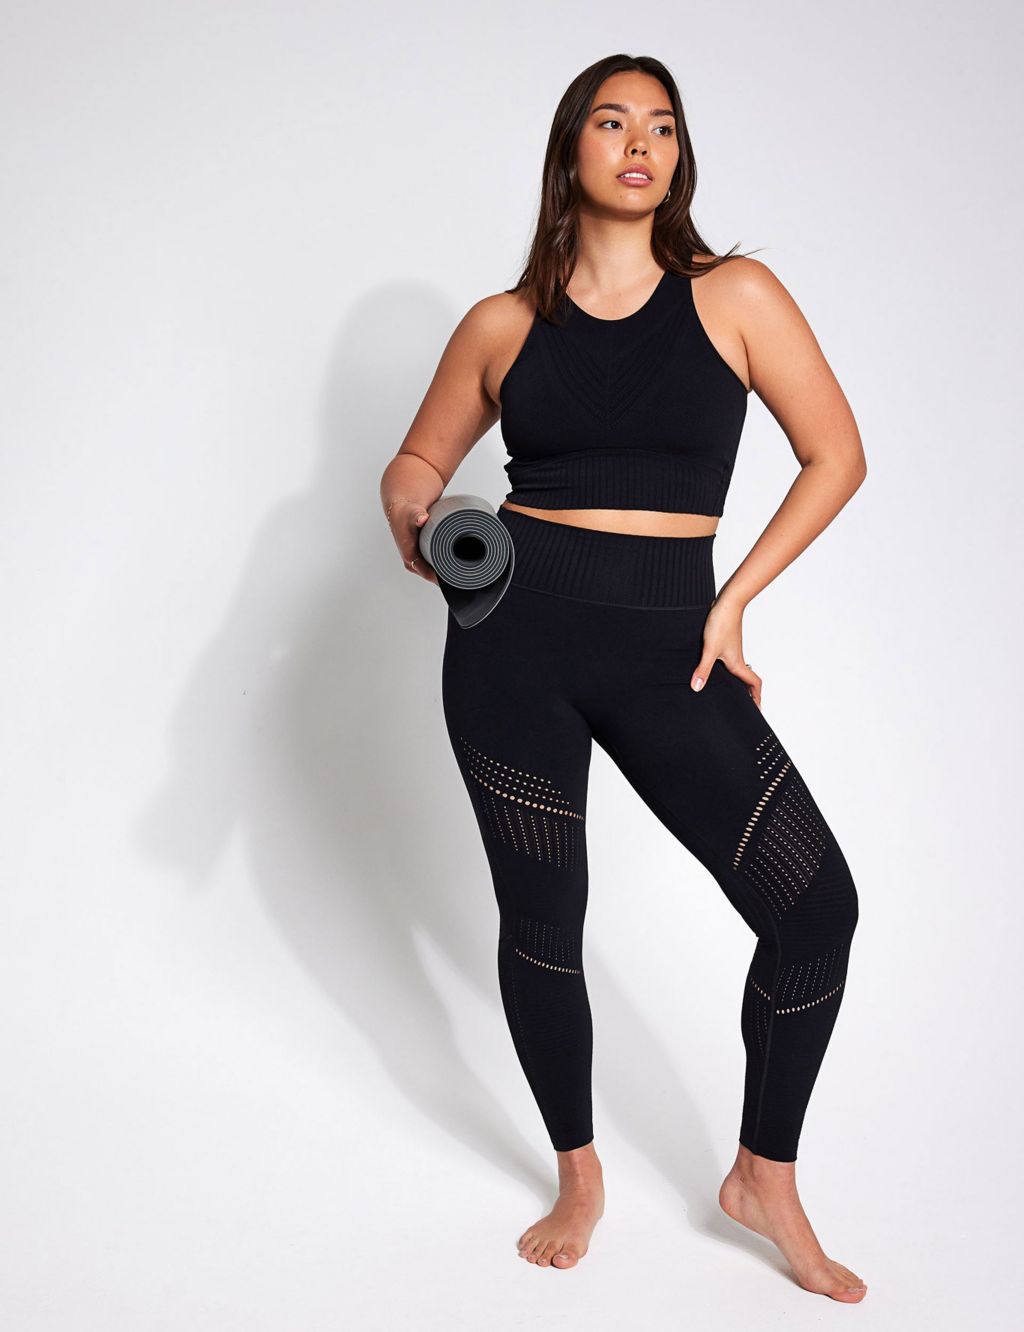 M&S shoppers rushing to buy £19 'magic slimming leggings' that are selling  fast - Belfast Live